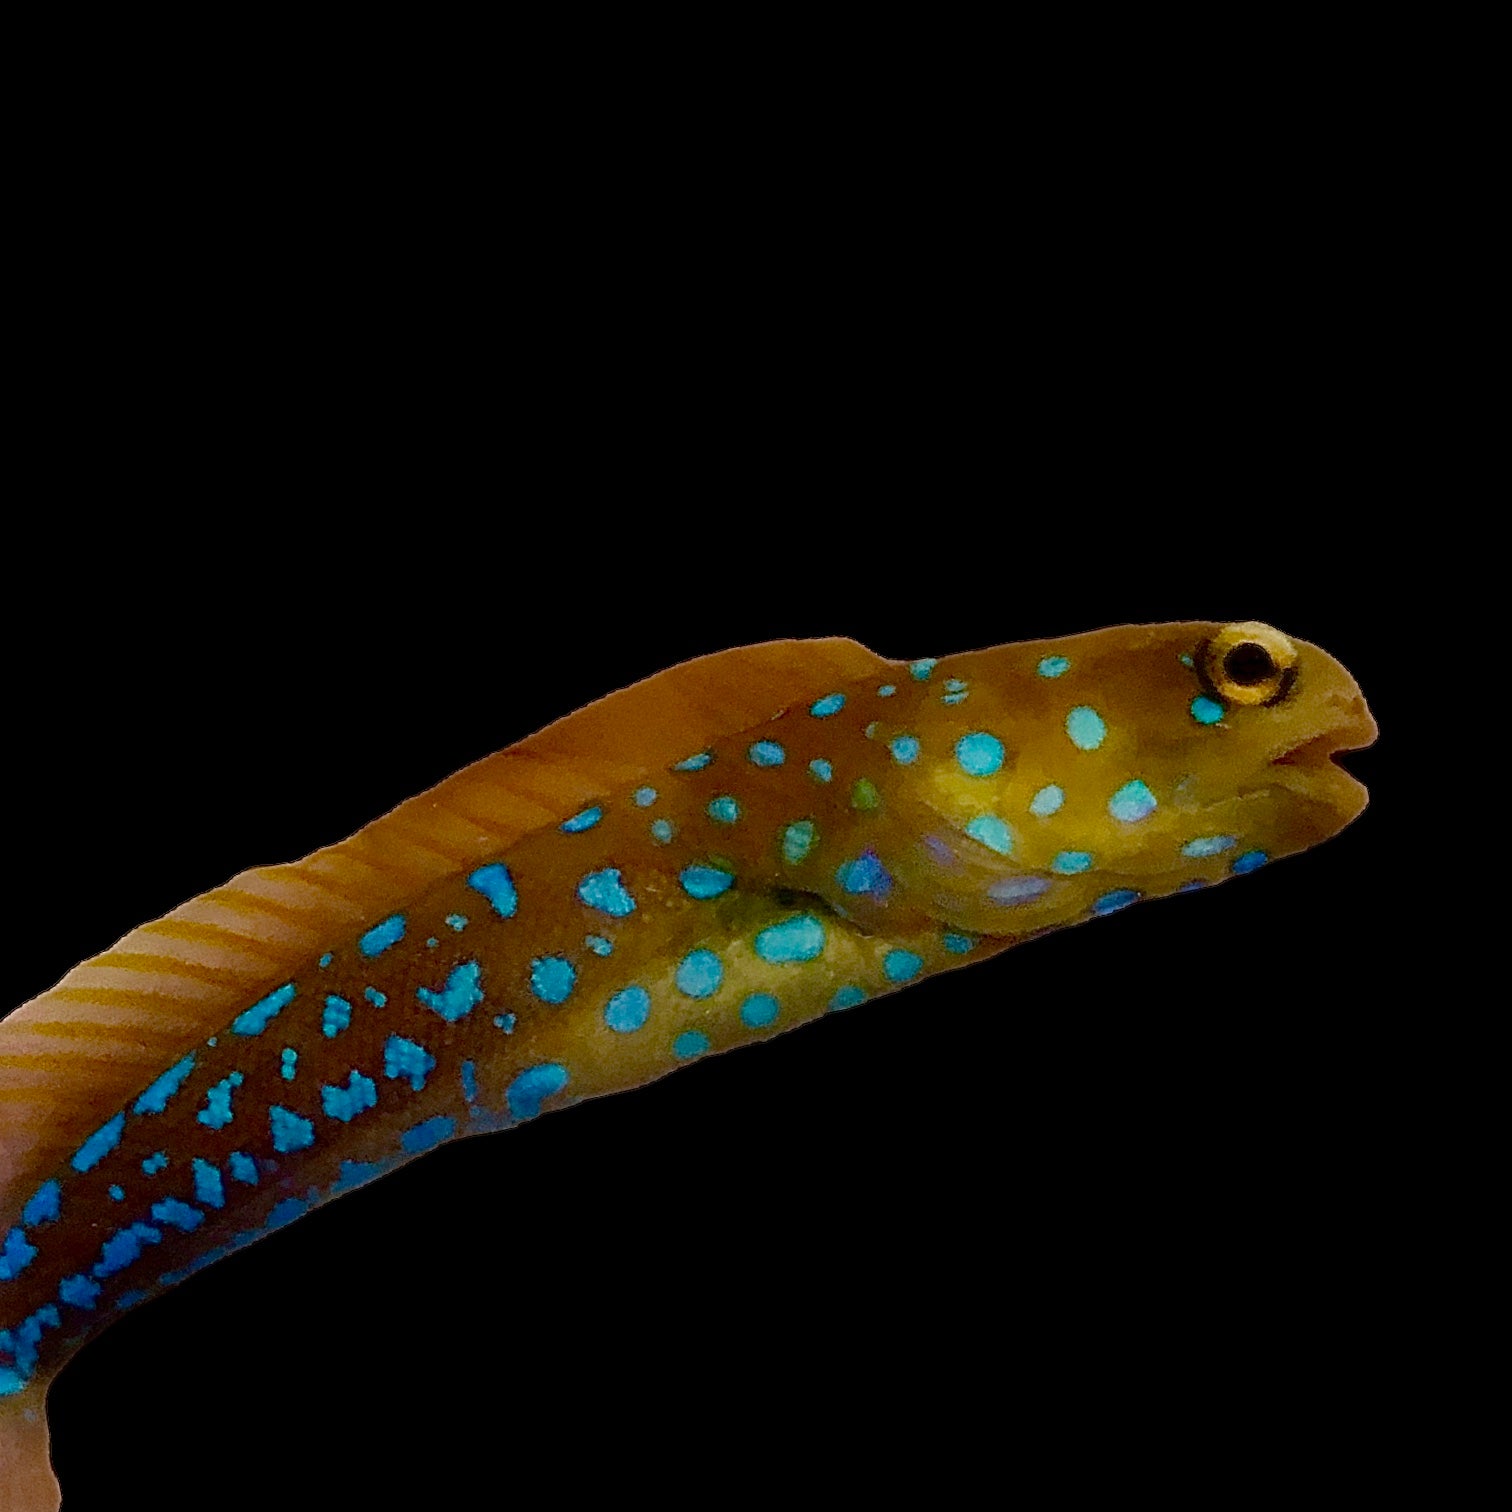 NEW ARRIVAL Aquarium Conditioned-Blue-spotted Jawfish